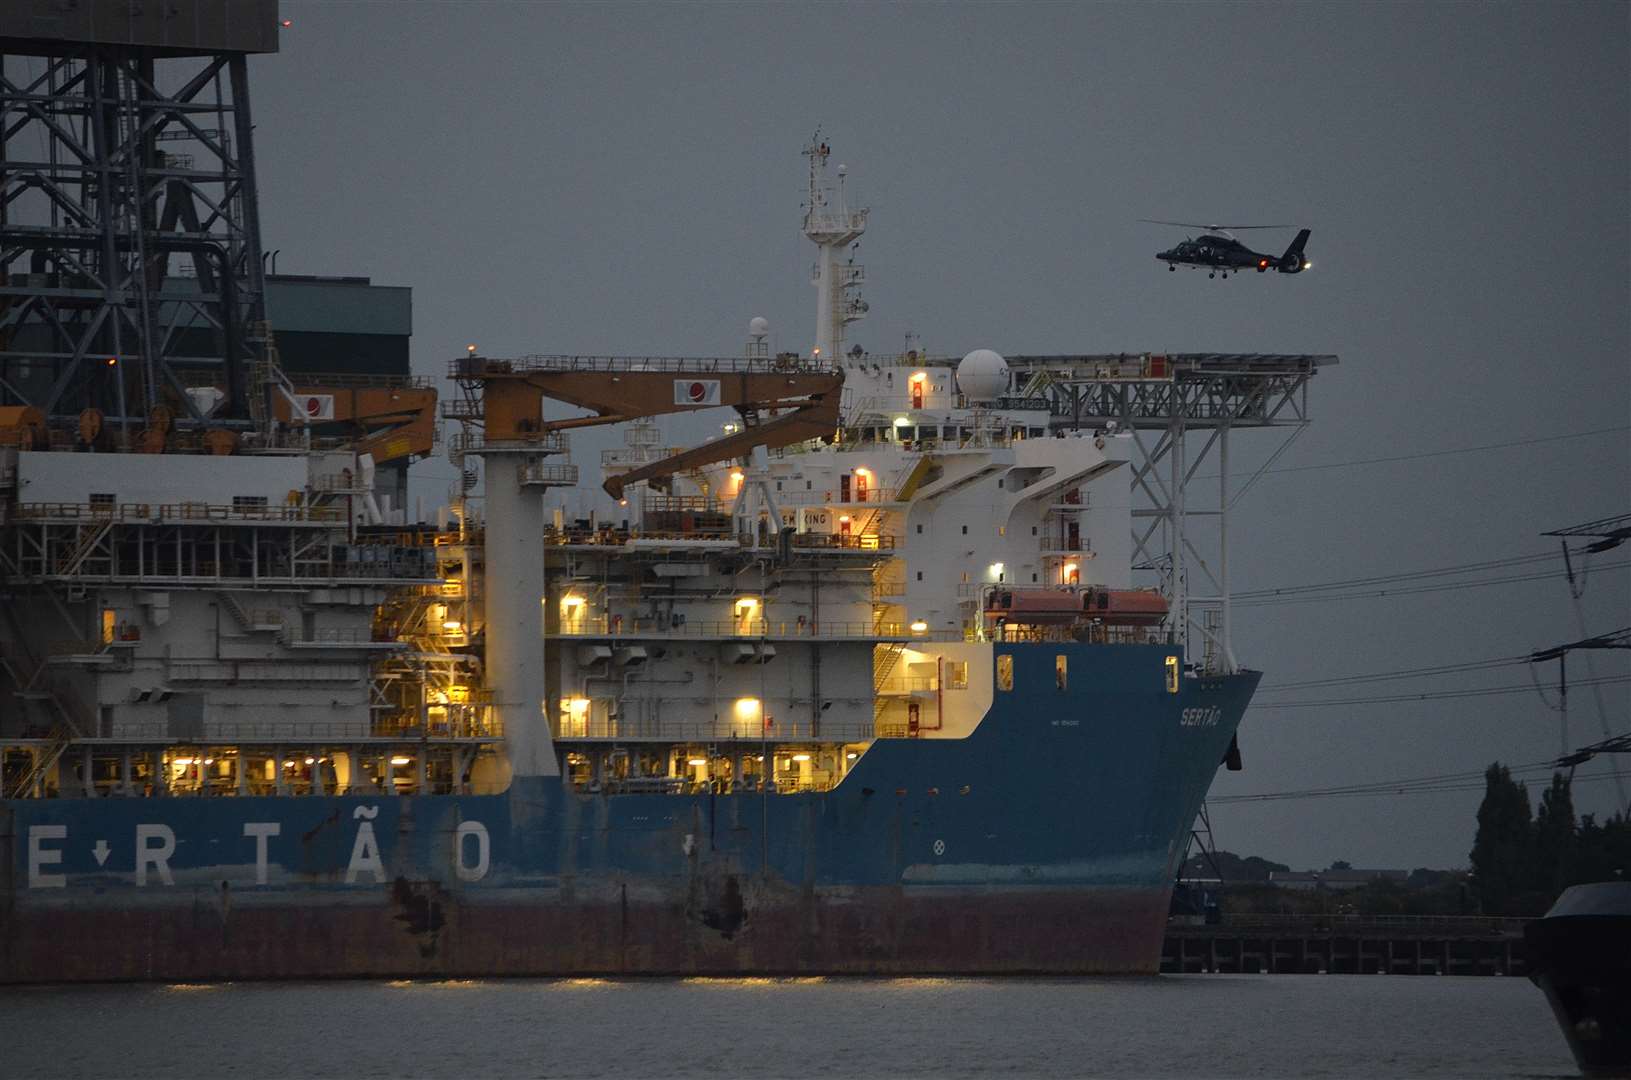 One of the helicopters lands on the Sertao drill ship. Picture: @jasonphoto